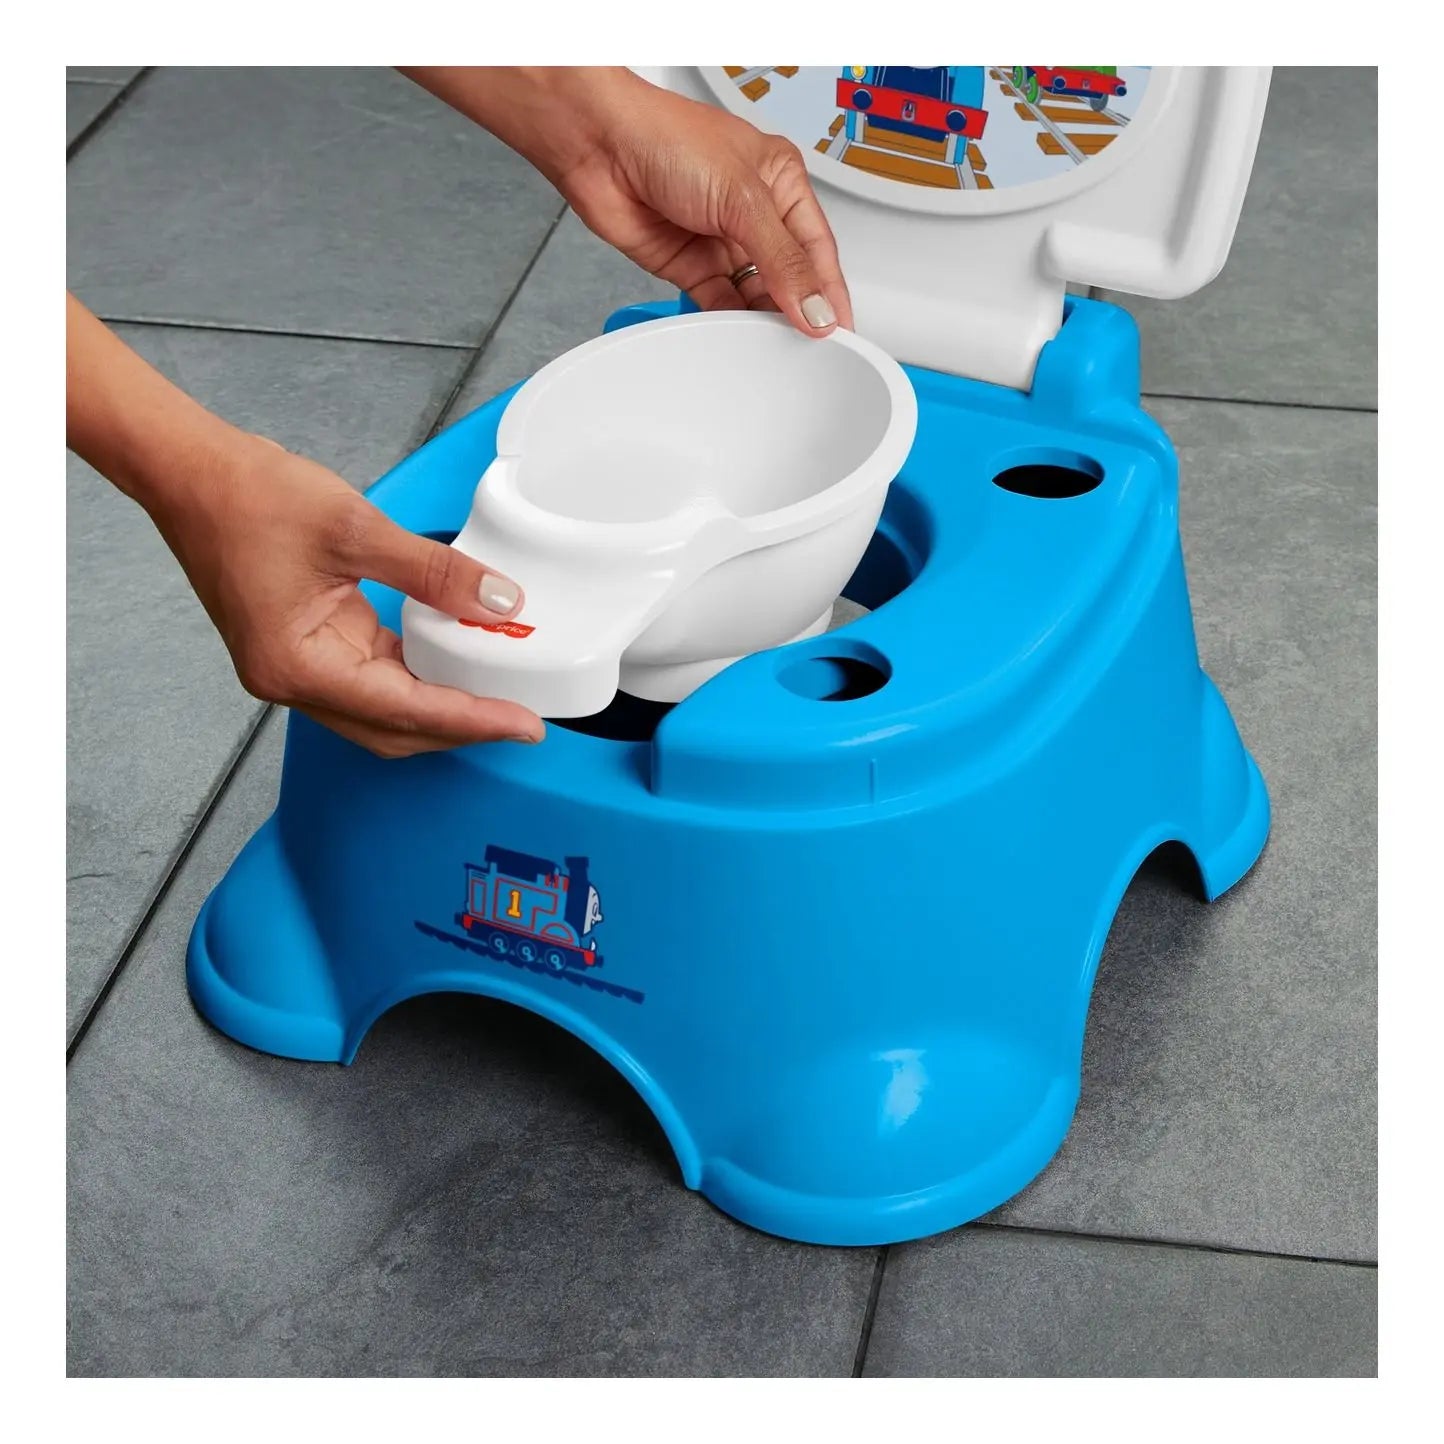 Fisher-Price 3-in-1 Thomas & Friends Potty Fisher-Price